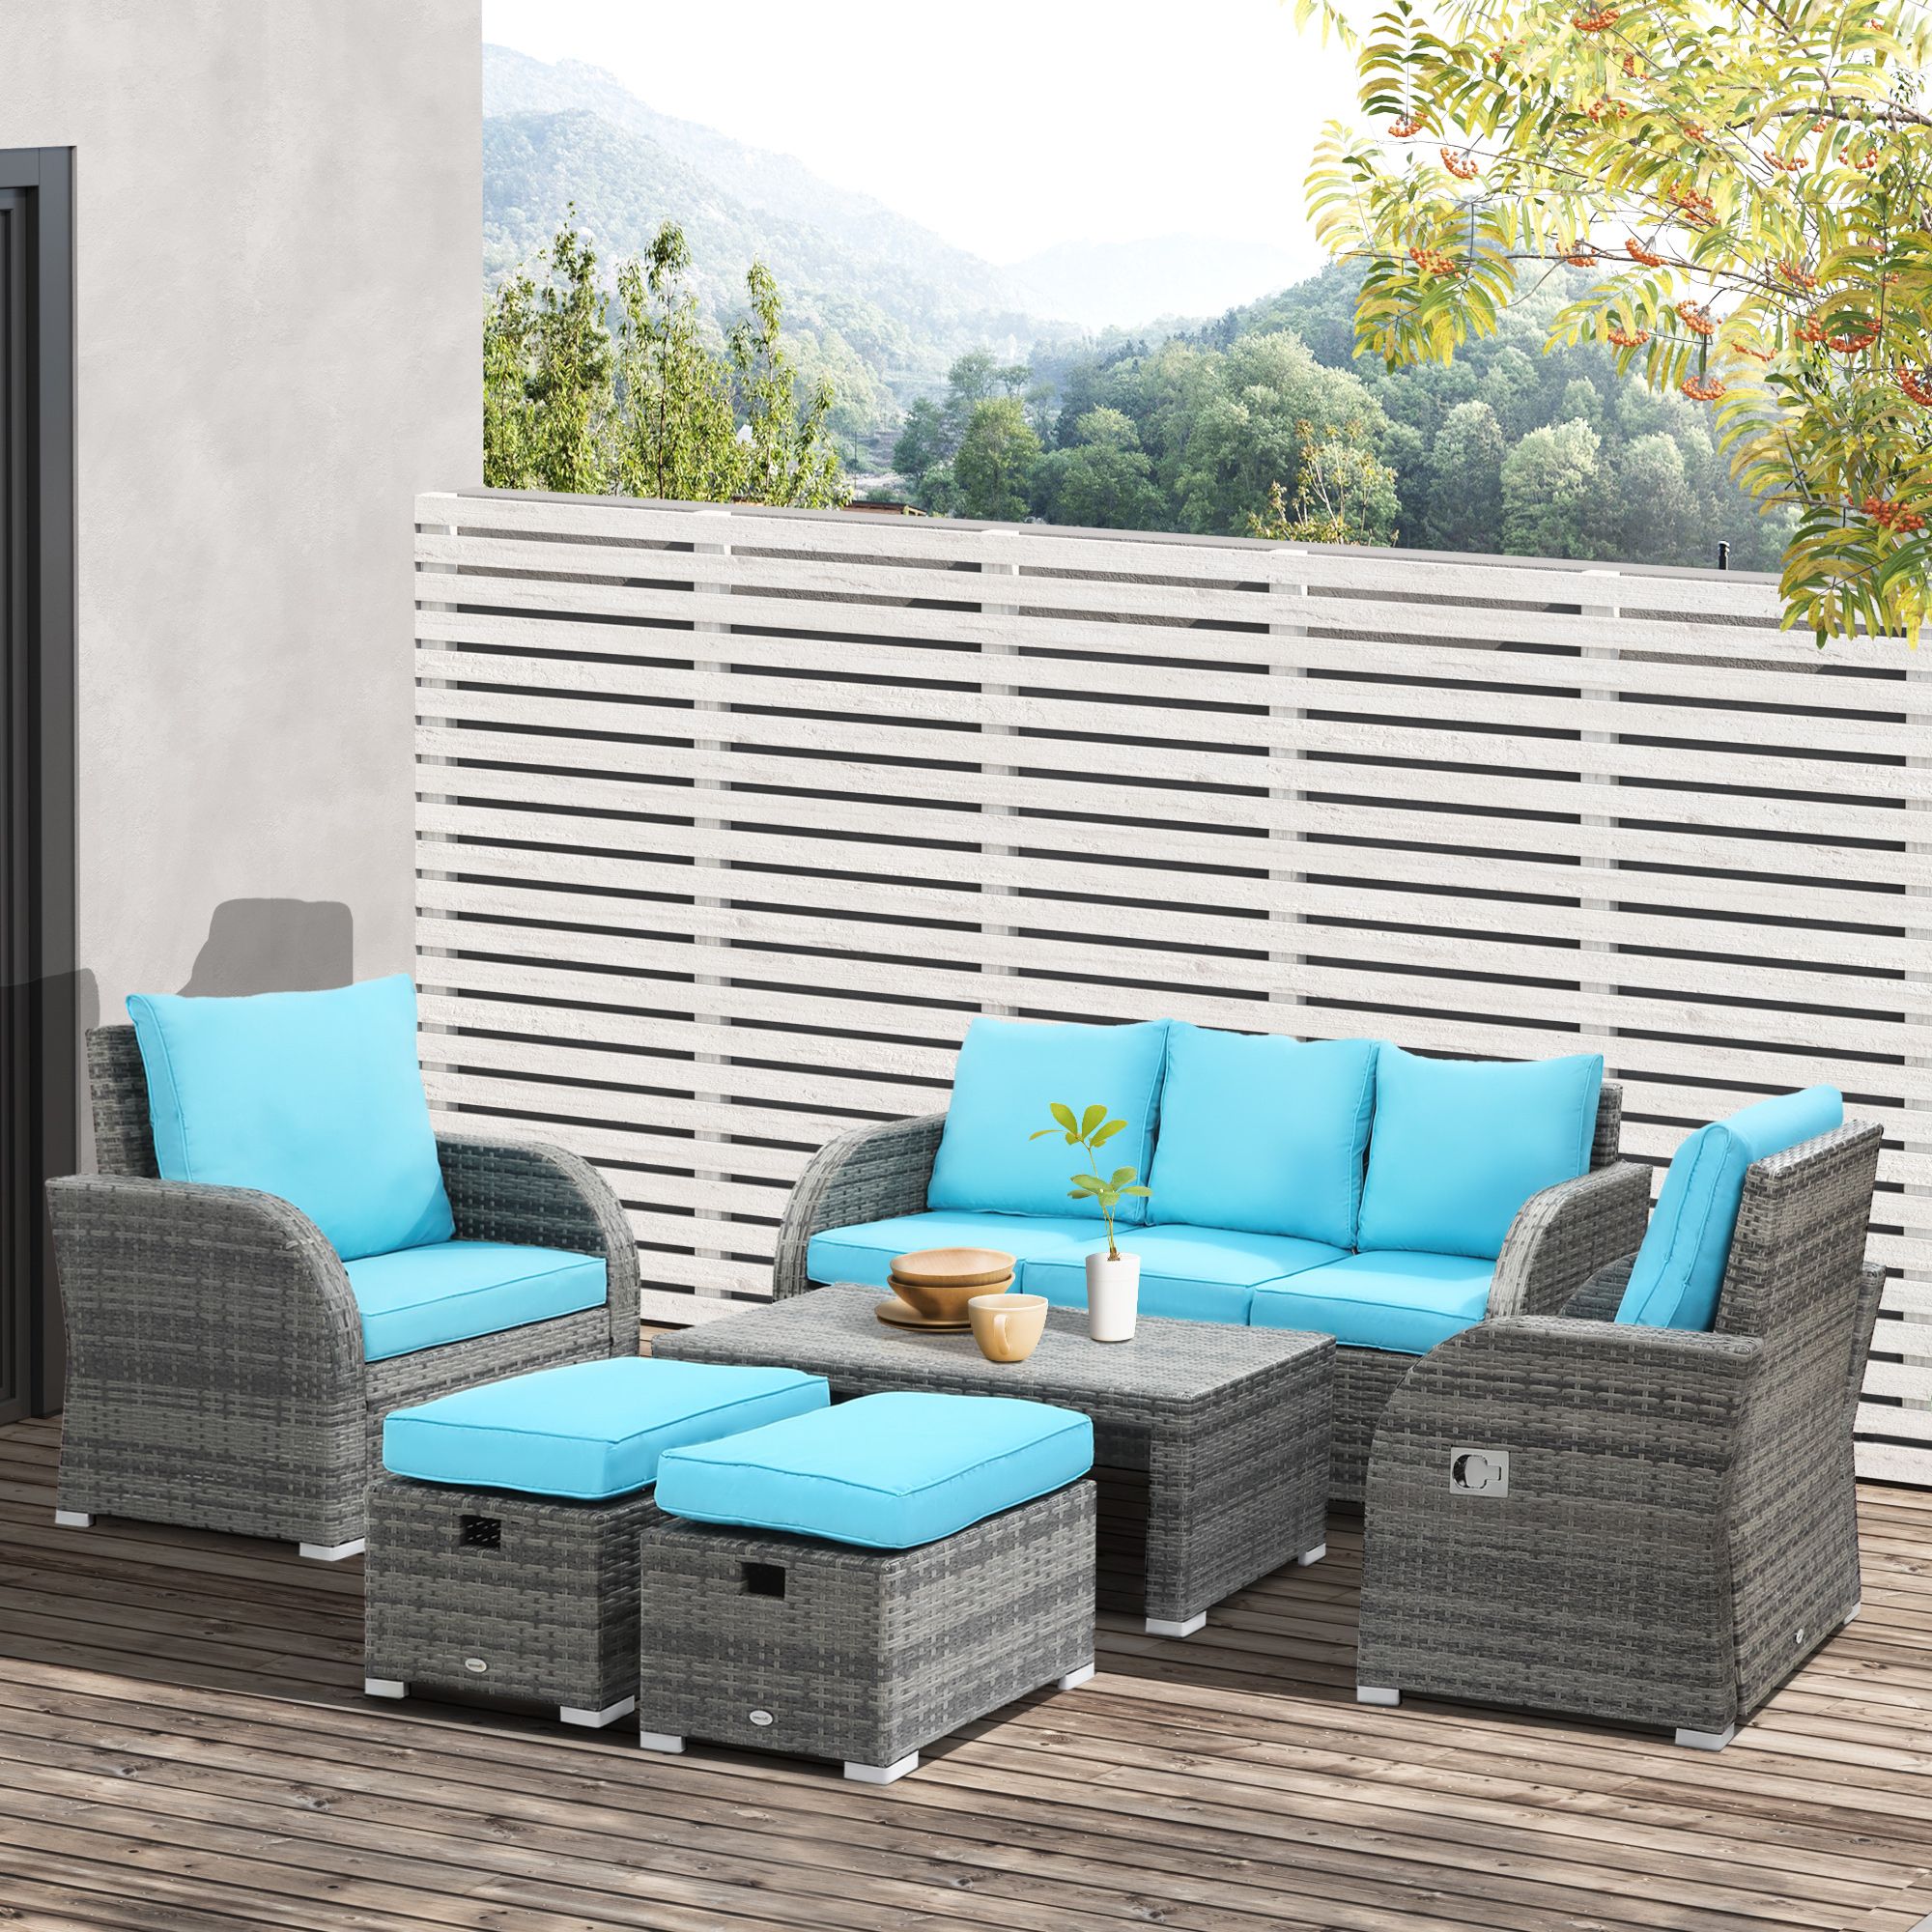 Furniture Conversation Set Cushioned Sofa Tables With Regard To Newest Outsunny 6 Pieces Patio Wicker Sofa Sets, Outdoor Sectional Furniture Set,  Include 3 Seat Sofa, 2 Adjustable Recliners, 2 Footstools & Table Set For  Lawn Garden Backyard, Sky Blue 6 Piece Rattan Cushioned Recliner, (View 10 of 15)